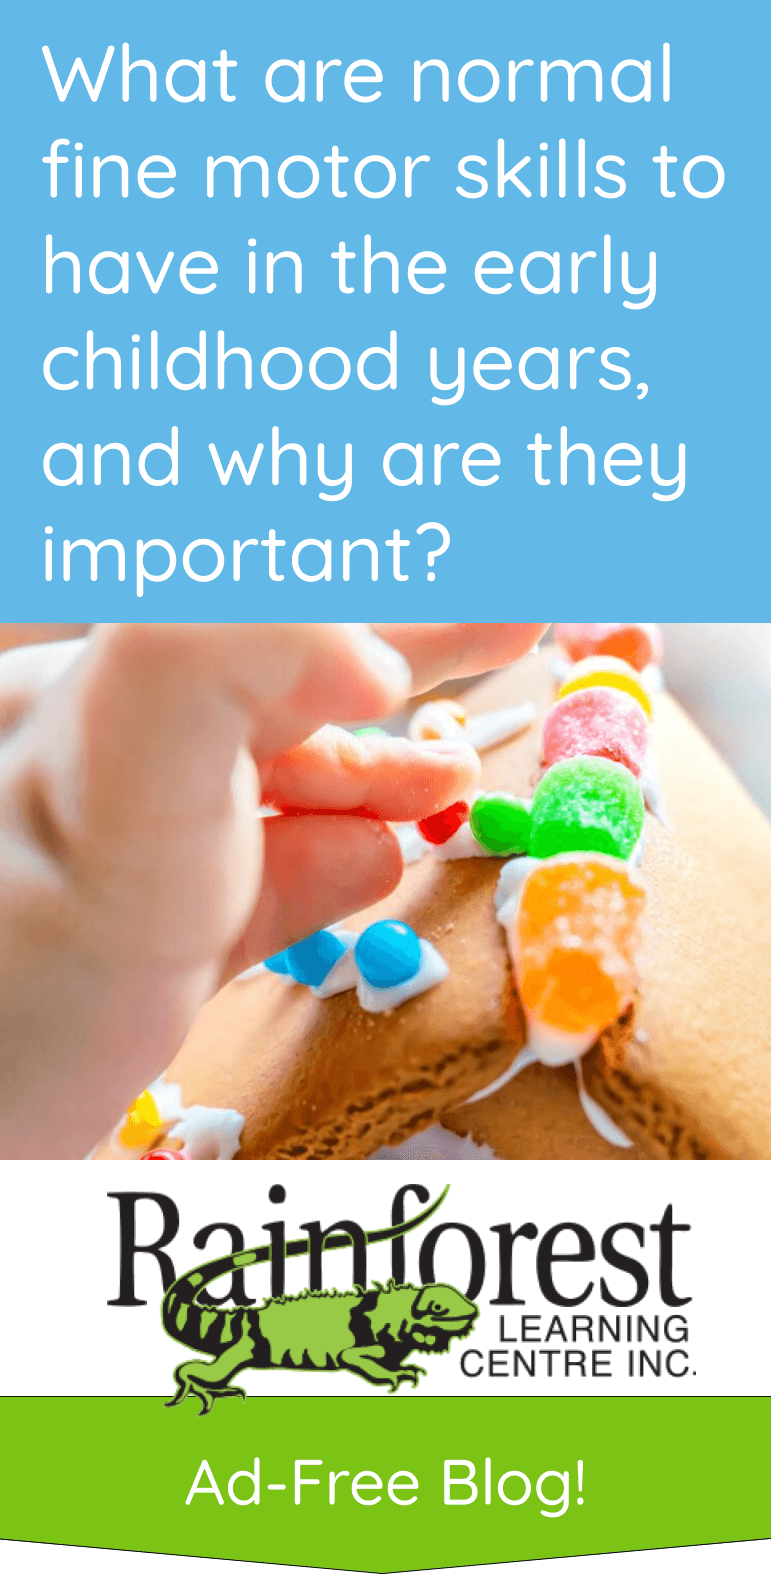 what are normal fine motor skills for preschoolers and why are they important - article pinterest image